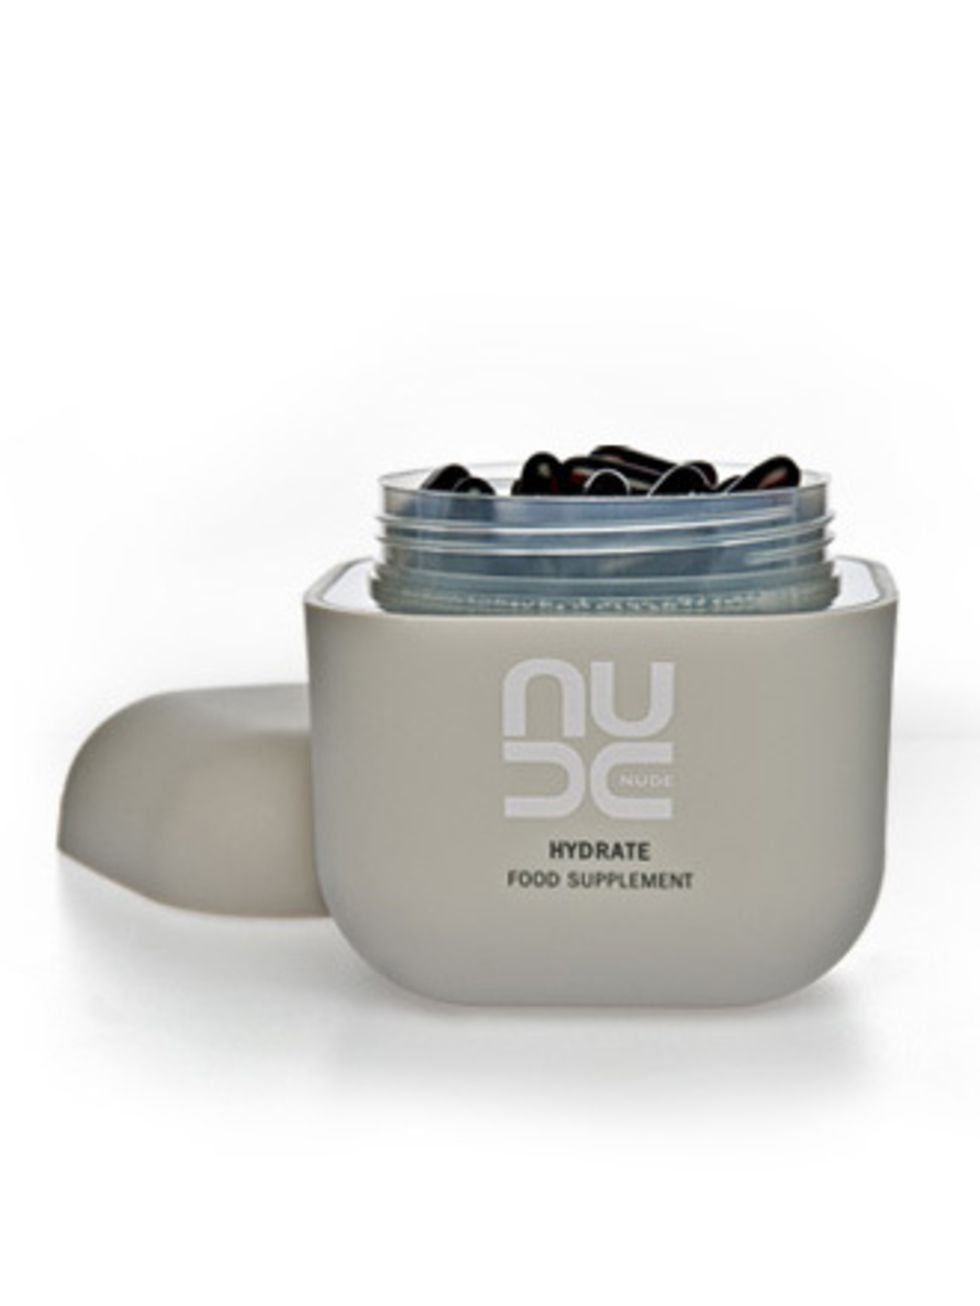 <p>Nourish your skin from the inside out. Nudes food supplements really do work. Start taking these a week or two before your trip, during and after.</p><p>Hydrate Food Supplement, £52 by <a href="http://www.nudeskincare.com/products/supplements/hydrate_